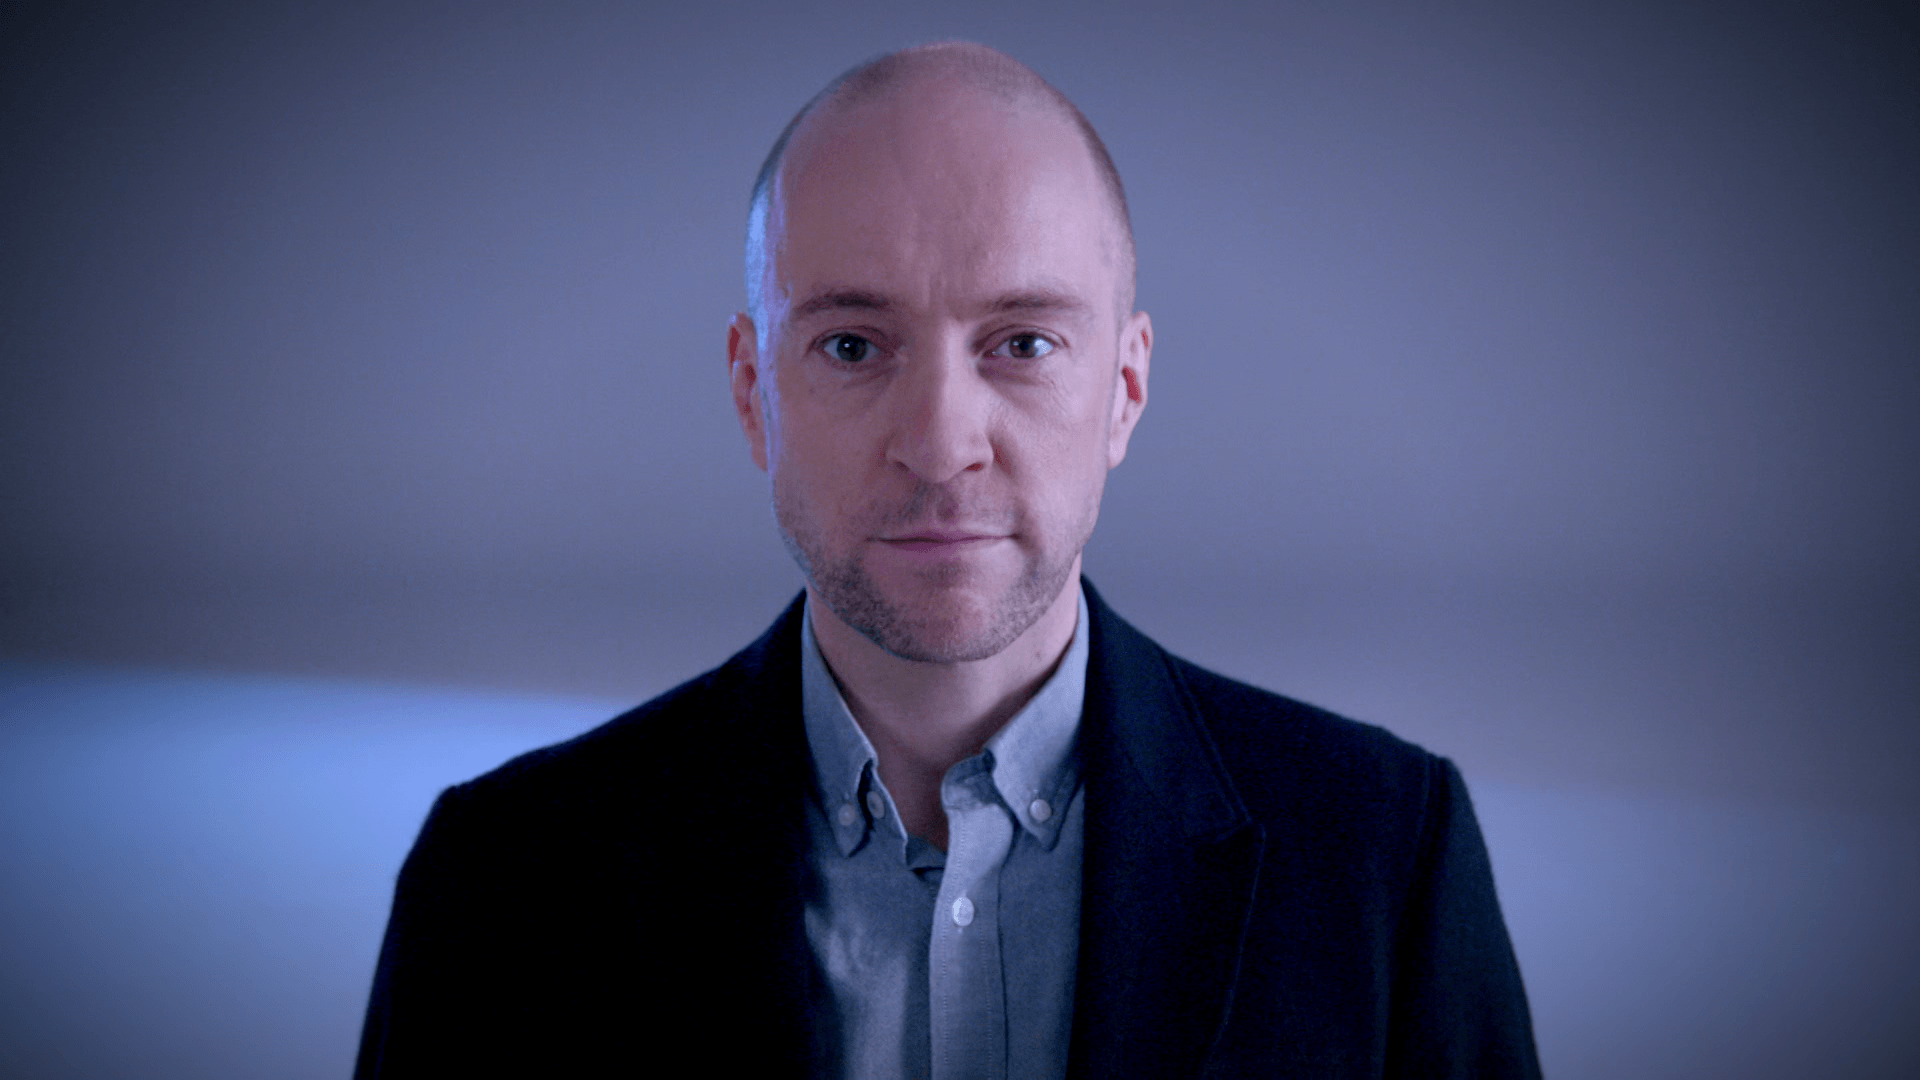 Can Derren Brown convince someone to be a Sacrifice for a stranger